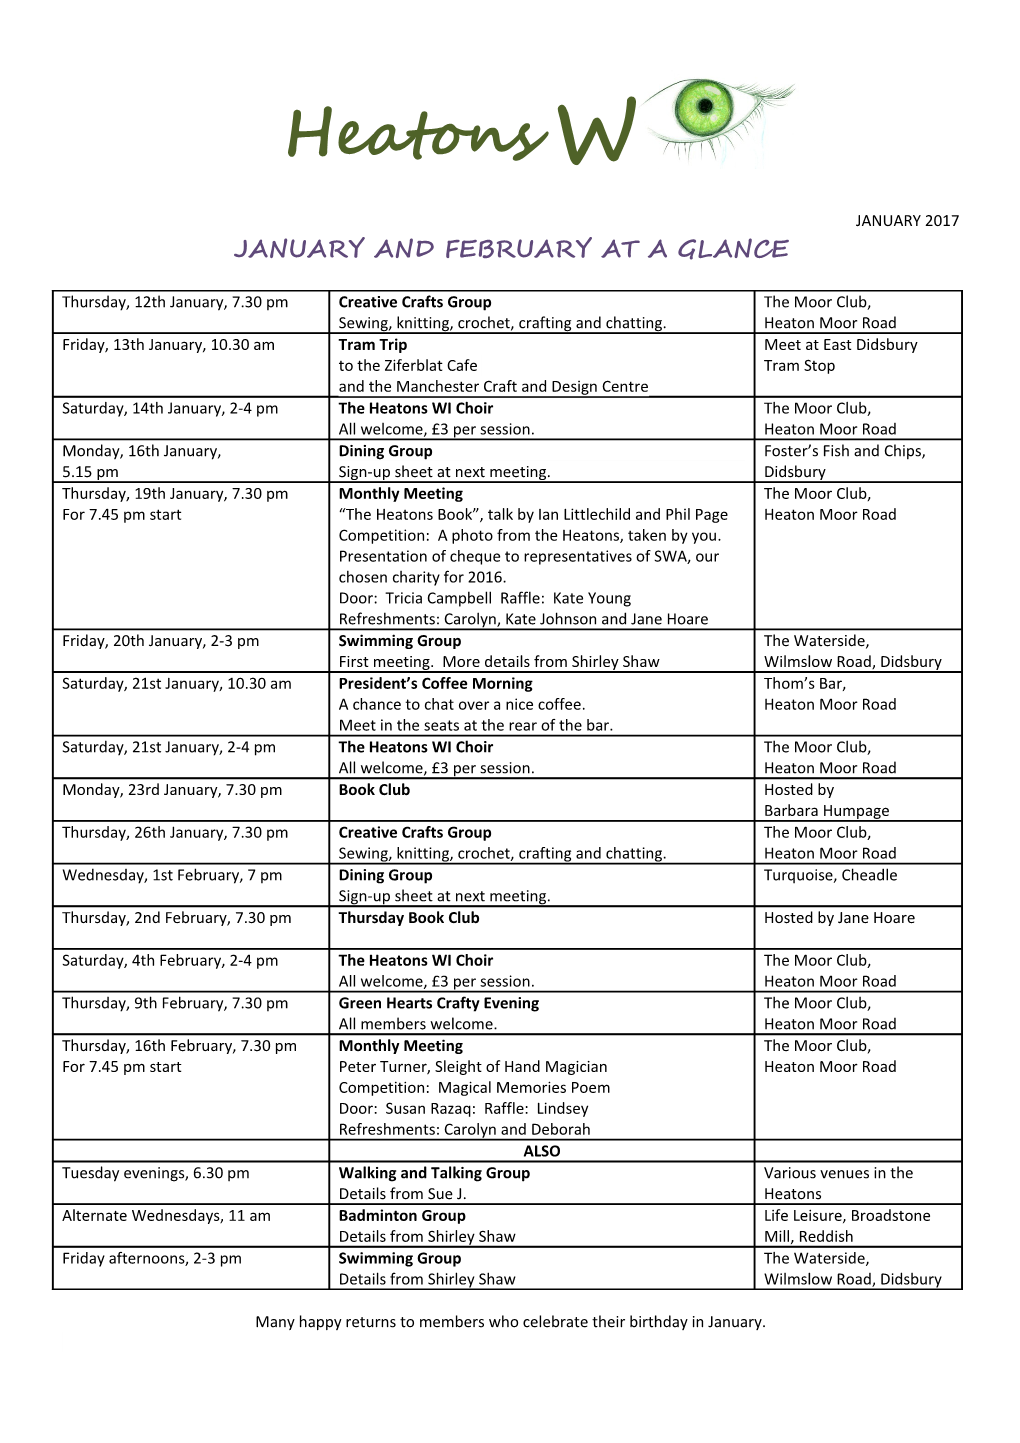 January and February at a Glance